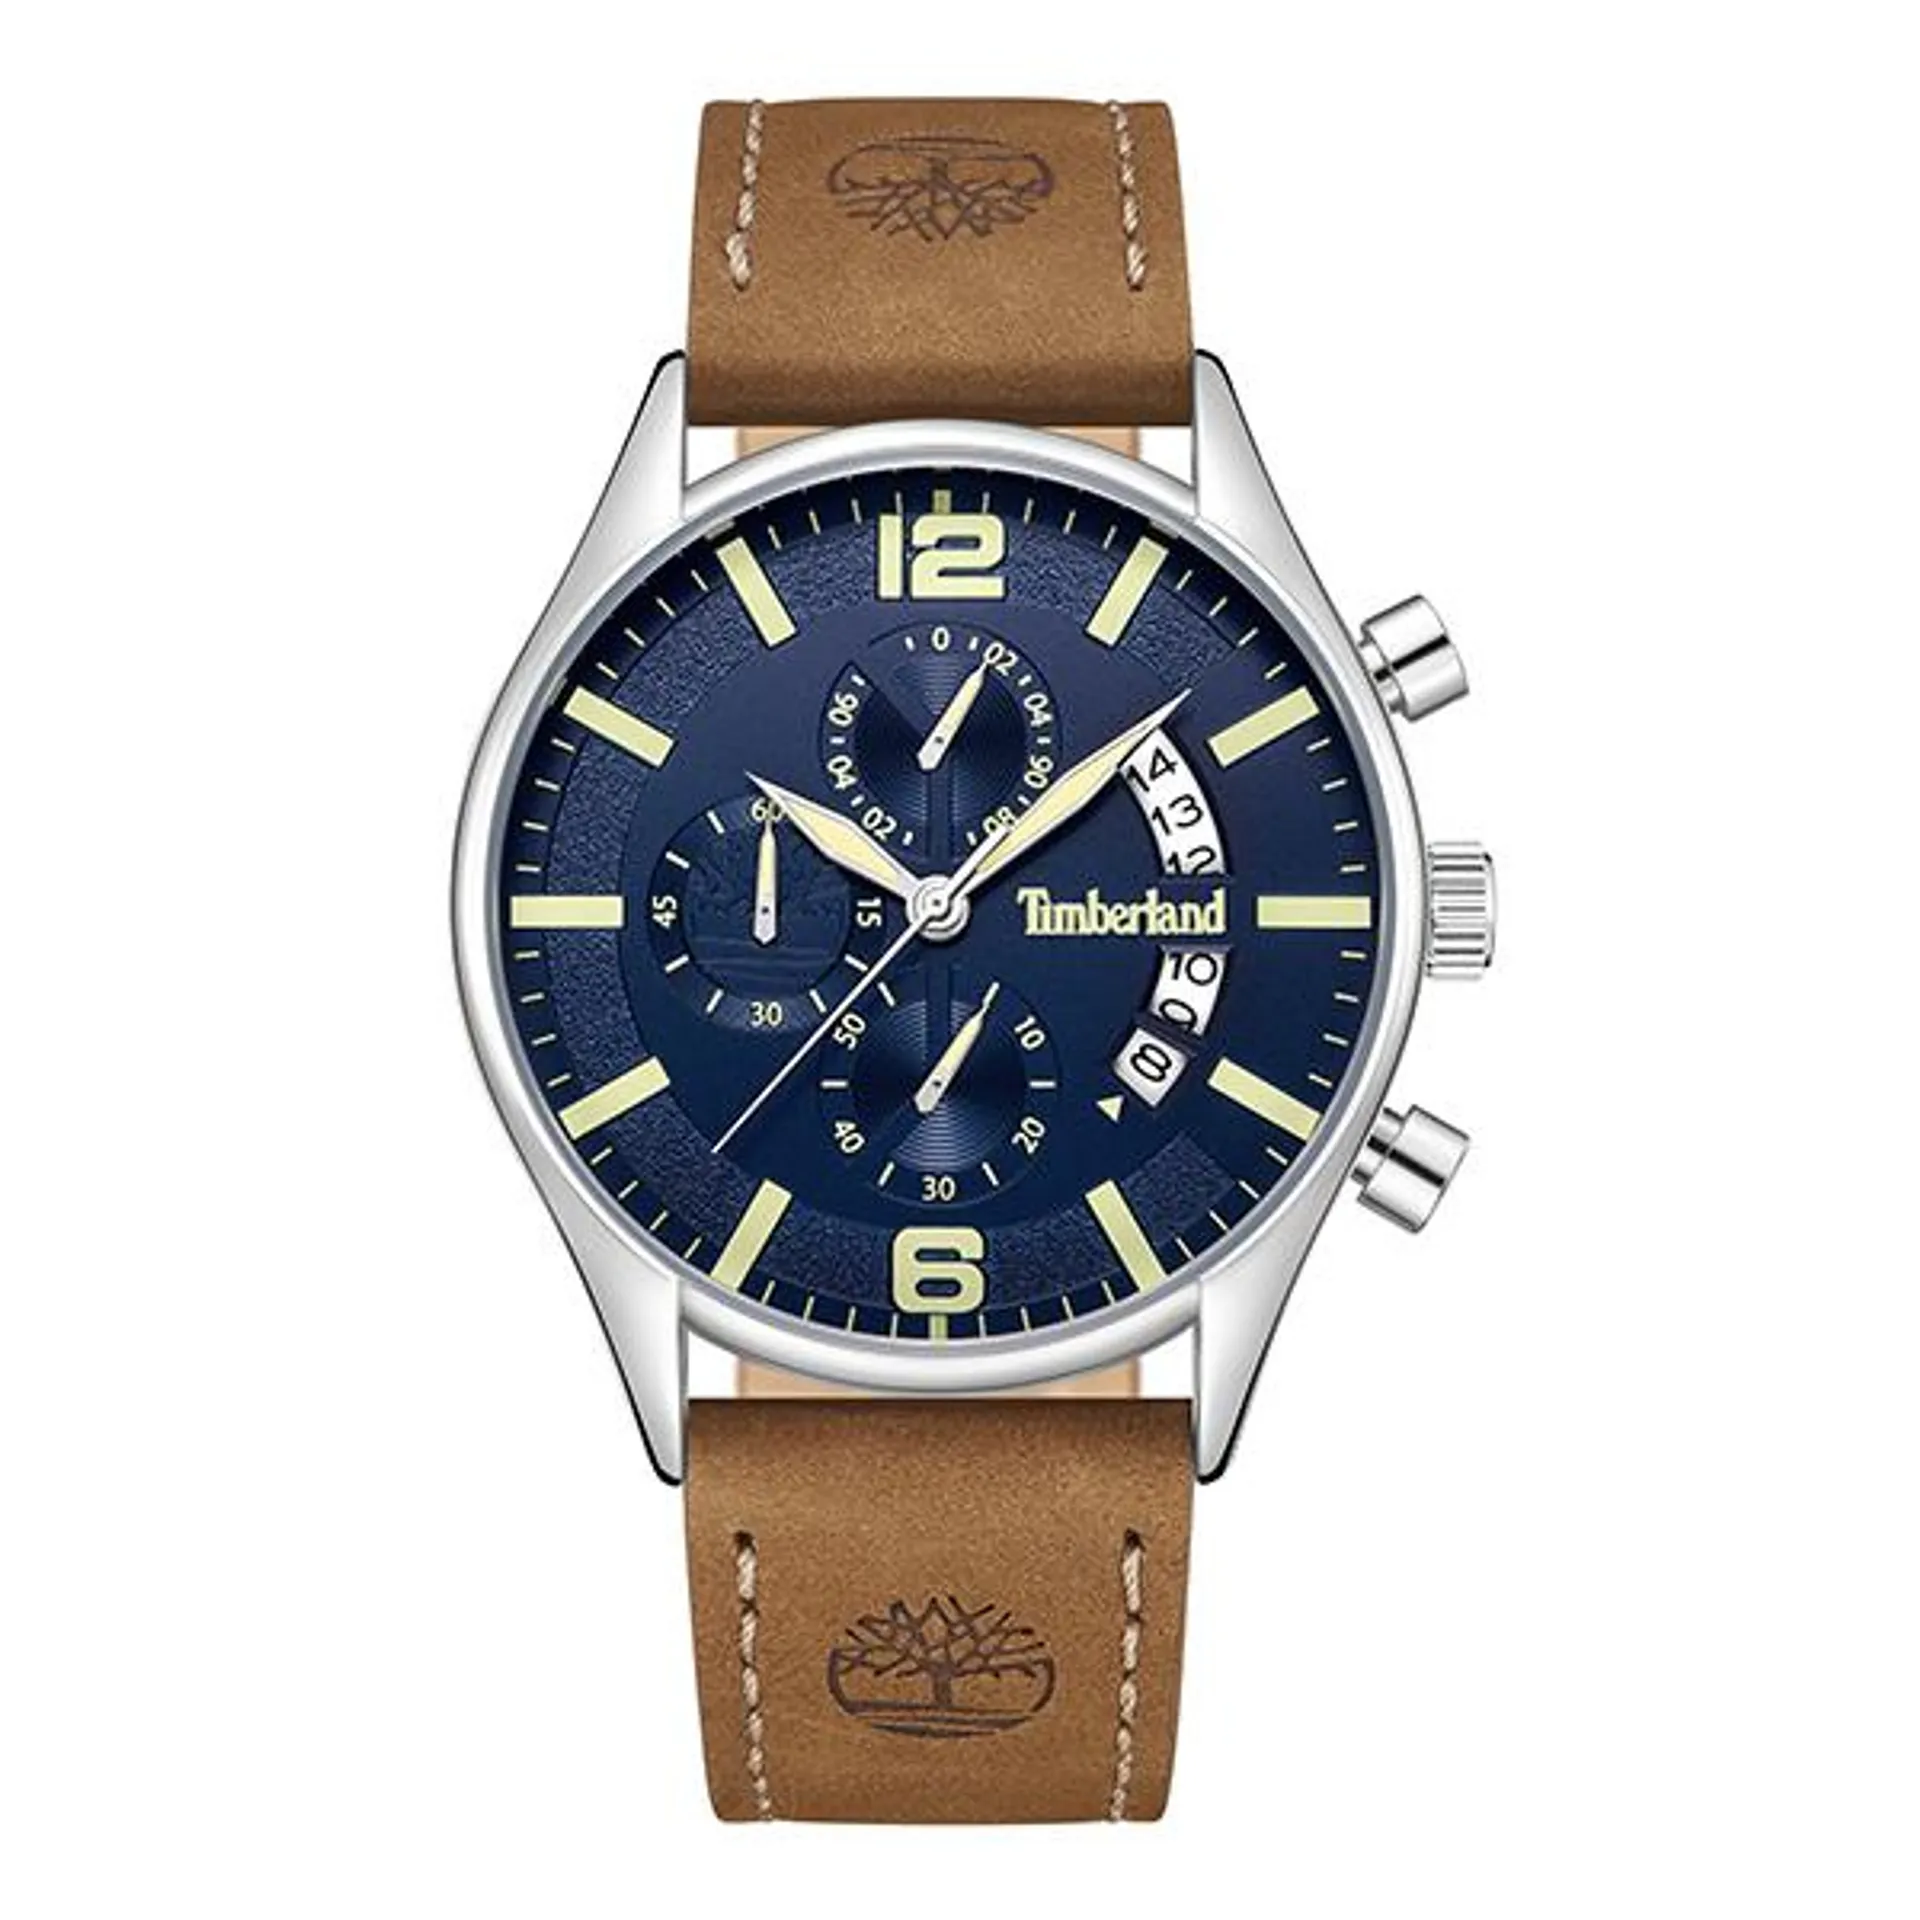 Timberland Gents Caticook Watch with Genuine Leather Strap